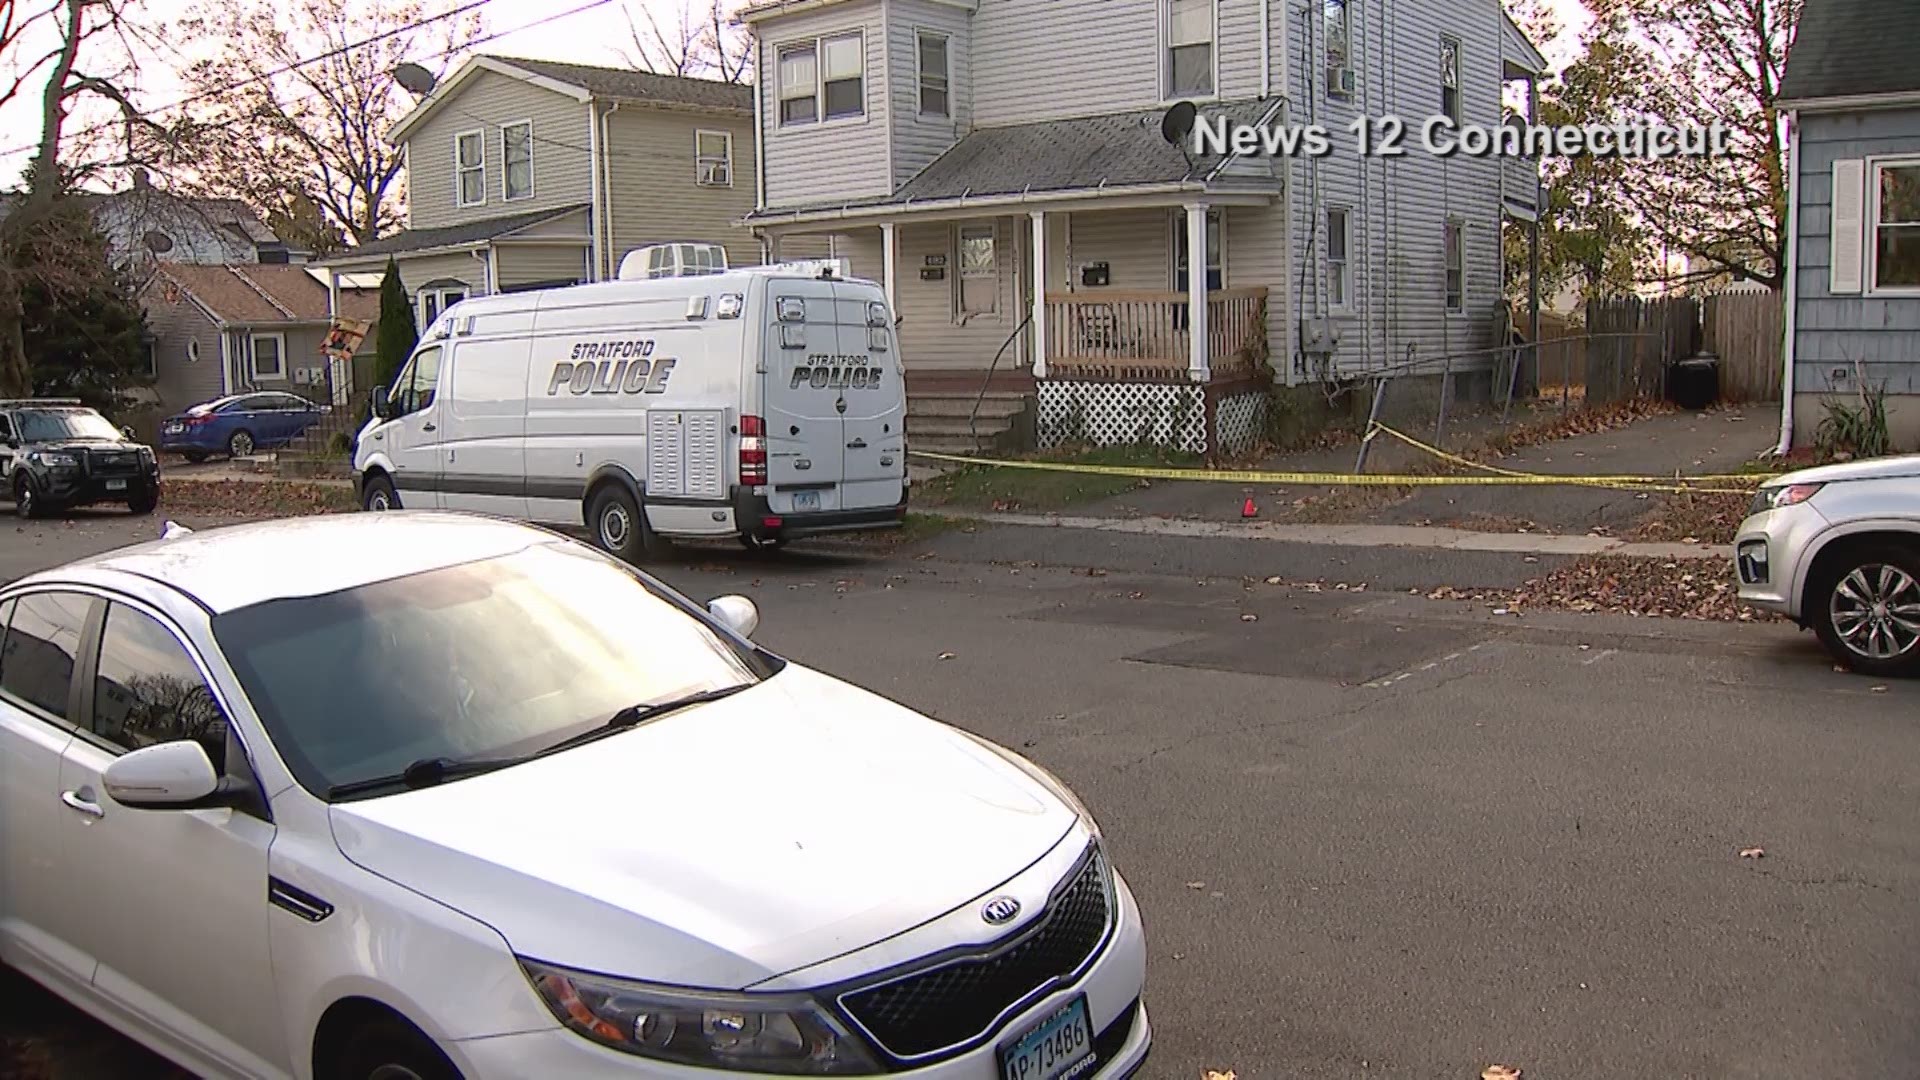 Victim was identified as 37-year-old Anthony Martinez, of Bridgeport